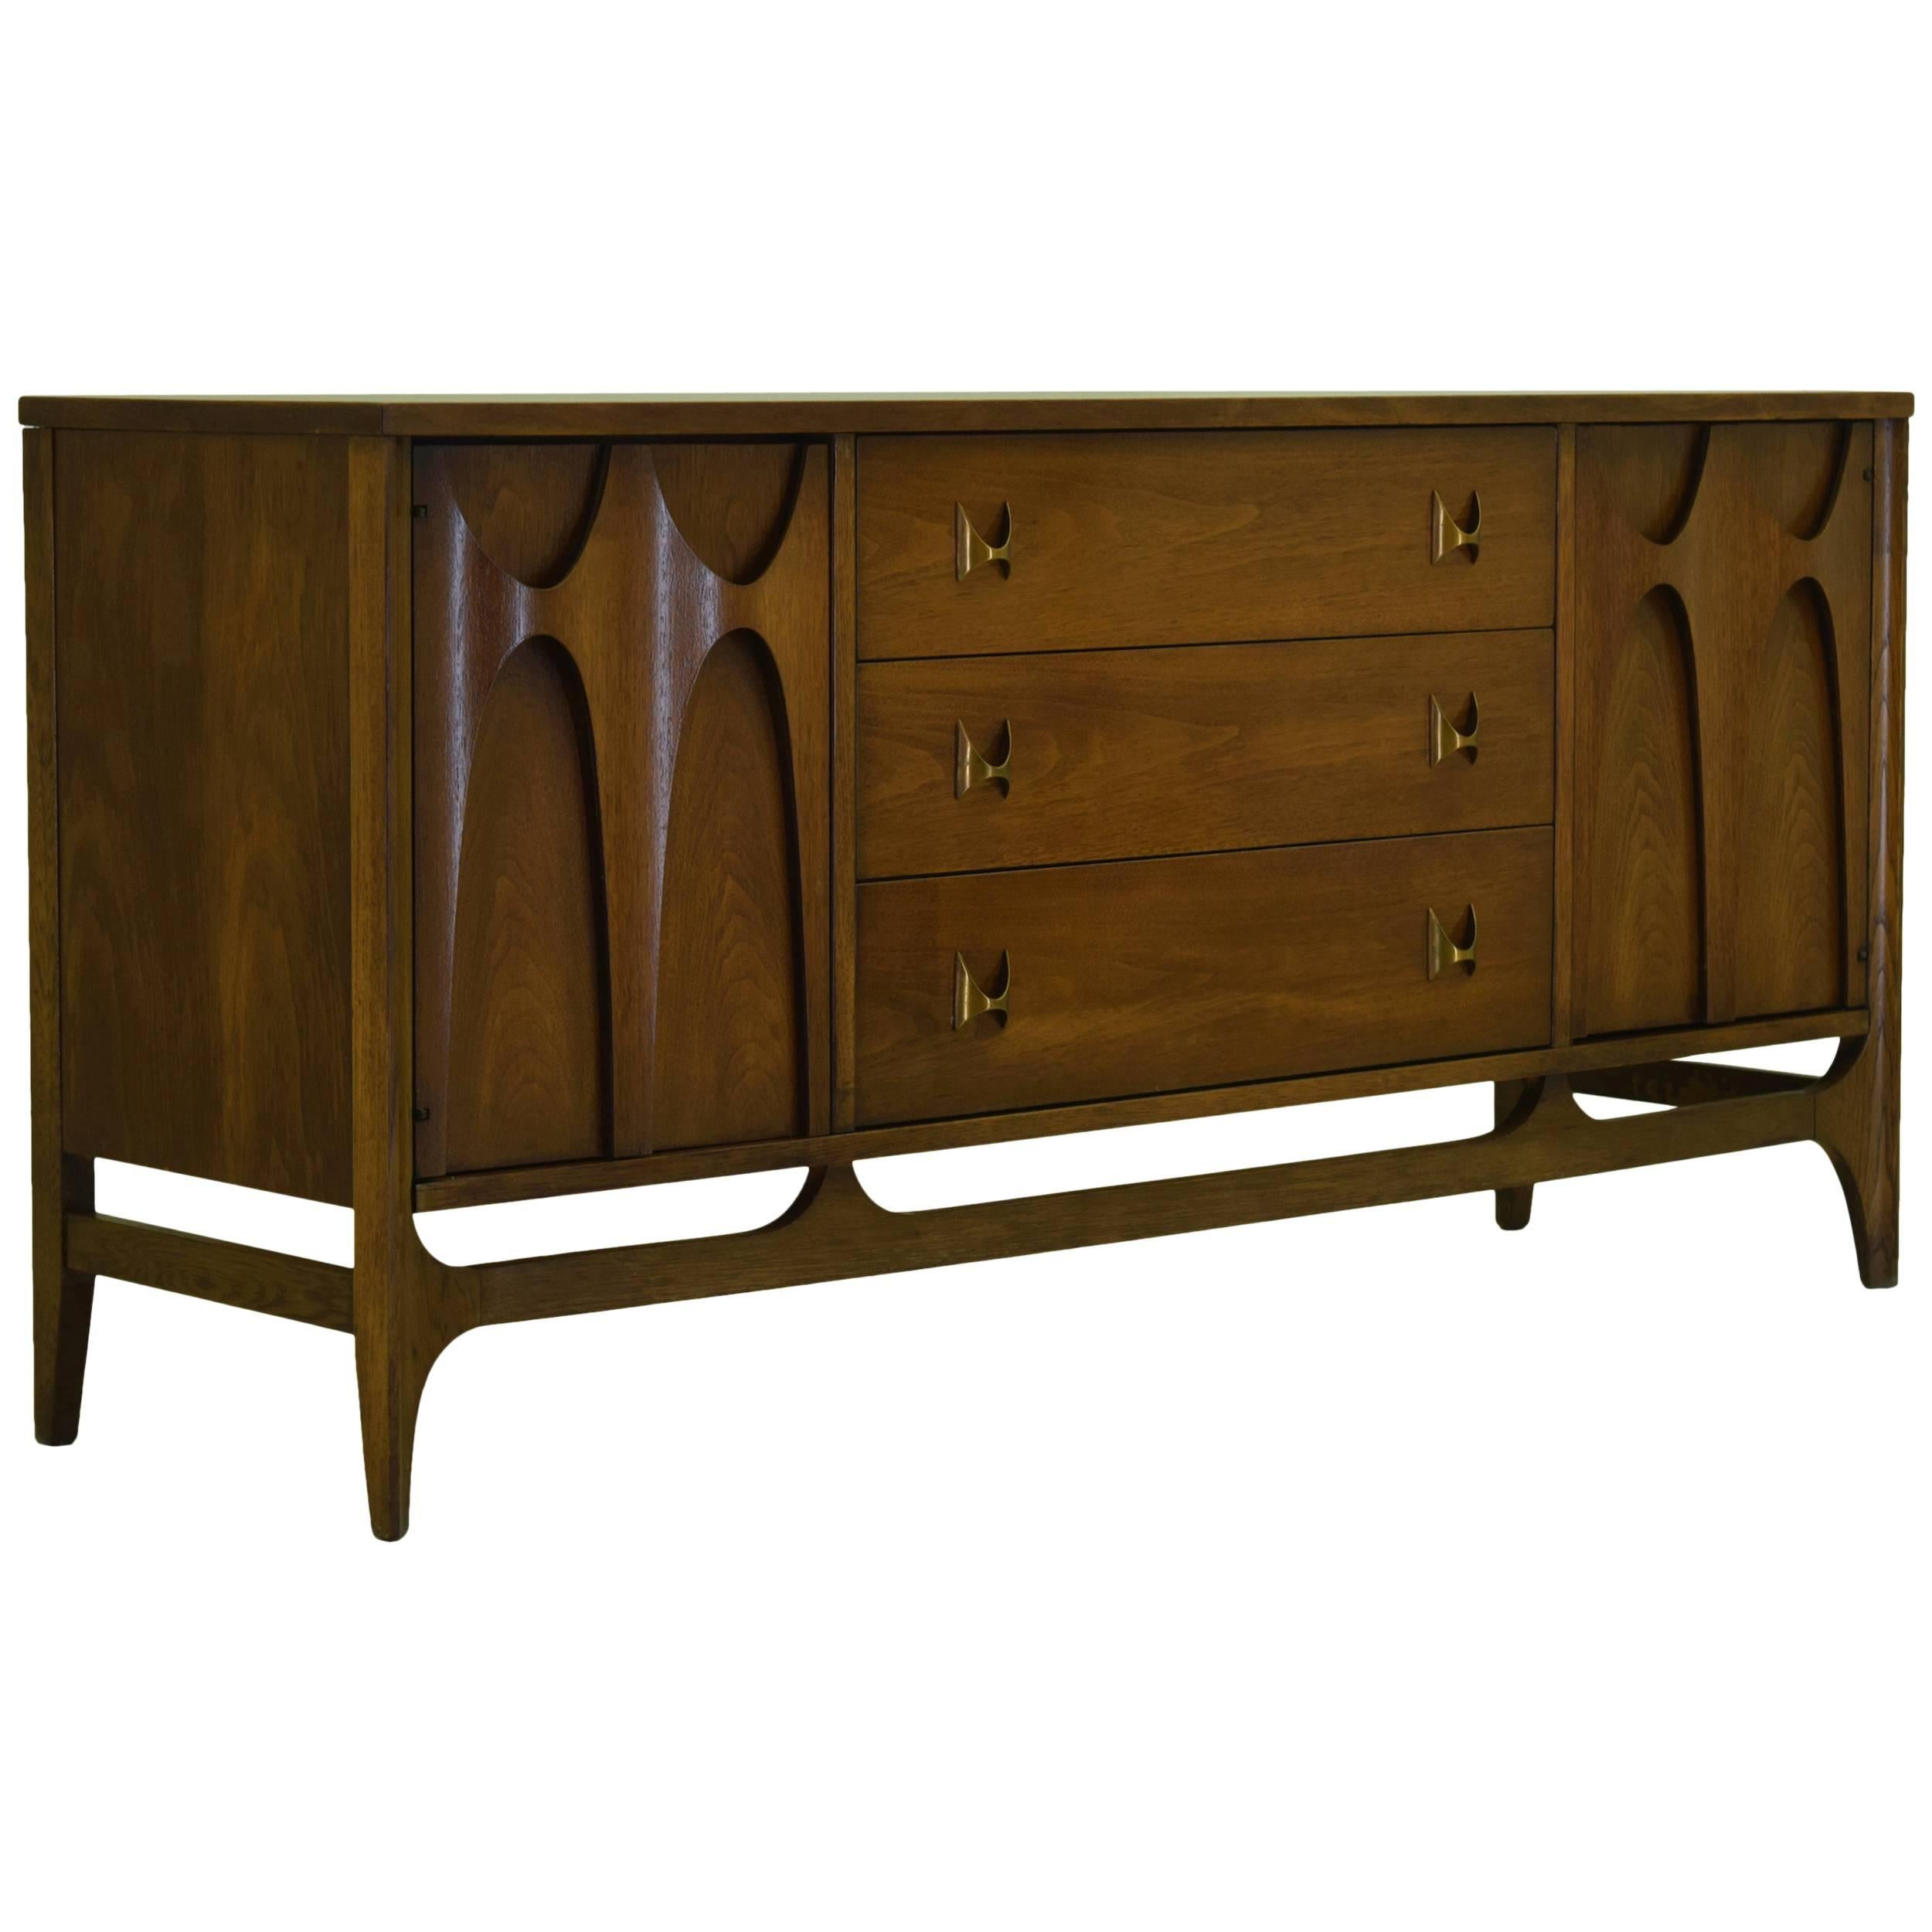 Price is for both buffet and the hutch.

The Broyhill Brasilia series inspired by Oscar Niemeyer is now widely recognized as the best mid century era design series produced by Broyhill. Coveted for iconic raised walnut designs that extend beyond